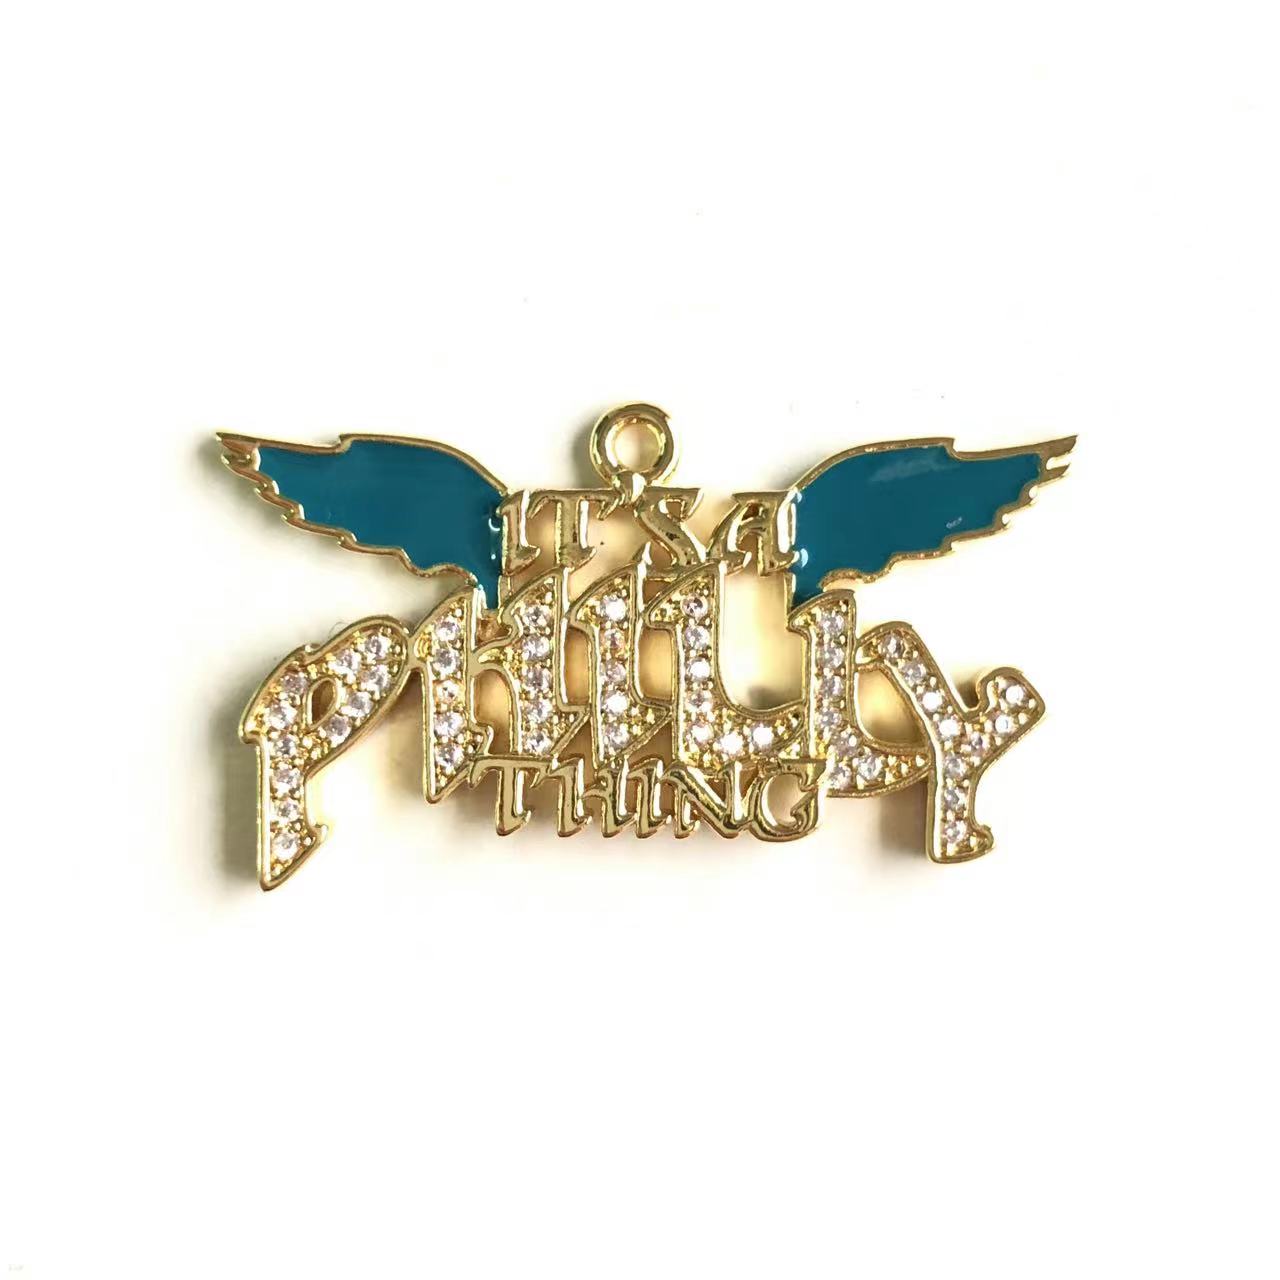 10pcs/lot CZ Paved "It is a Philly Thing" Word Philadelphia Eagles Charms Gold CZ Paved Charms American Football Sports New Charms Arrivals Charms Beads Beyond